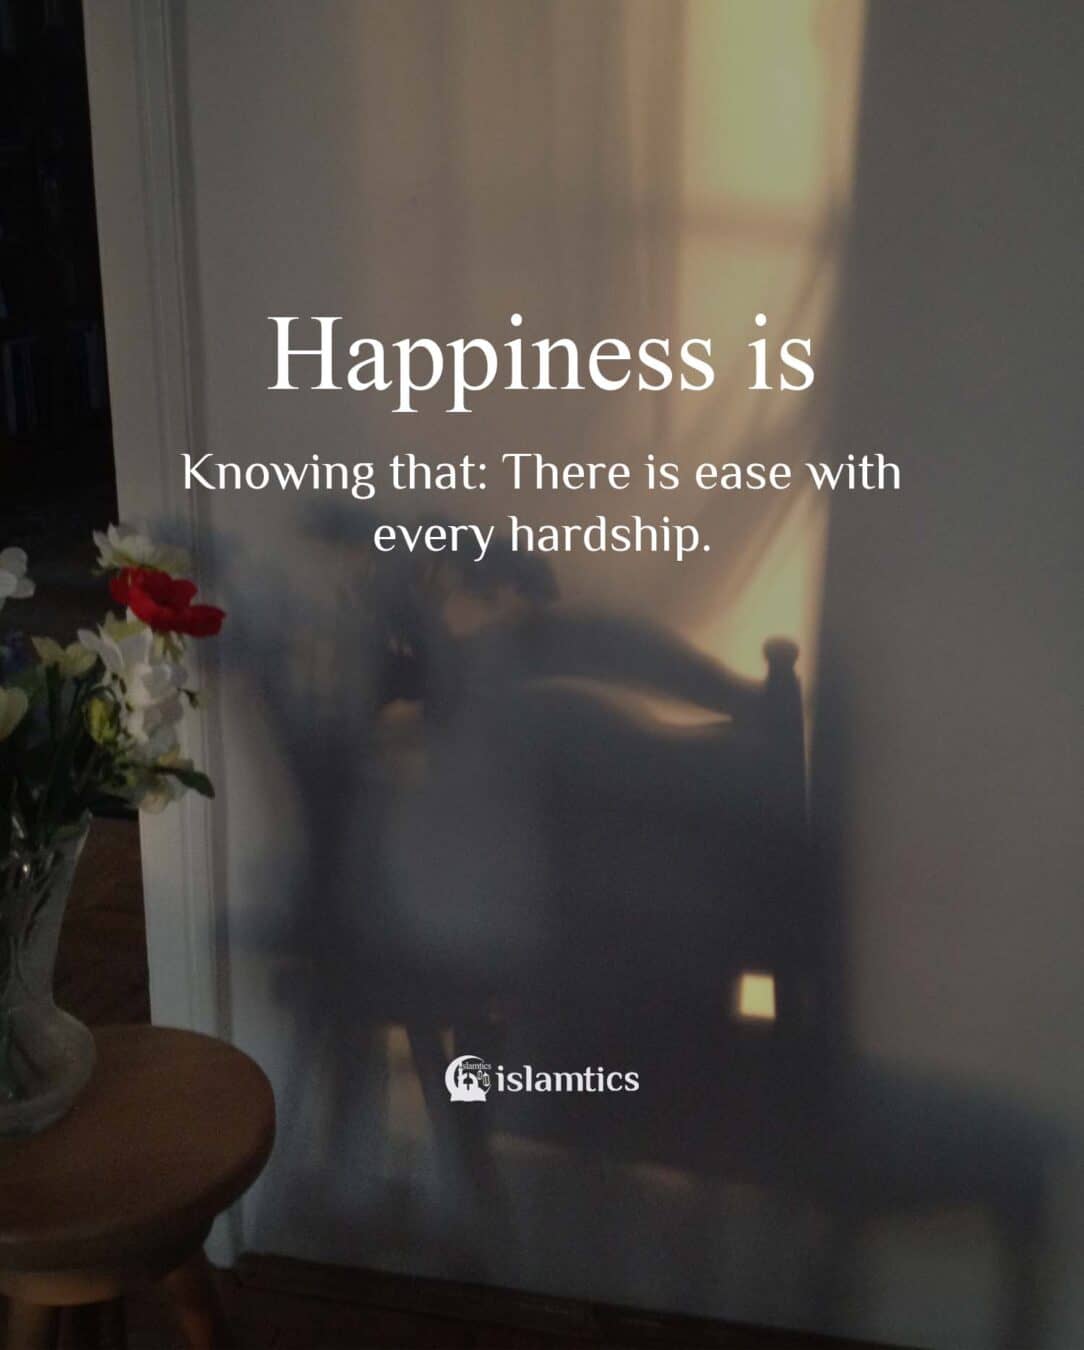 Happiness is Knowing that: There is ease with every hardship.